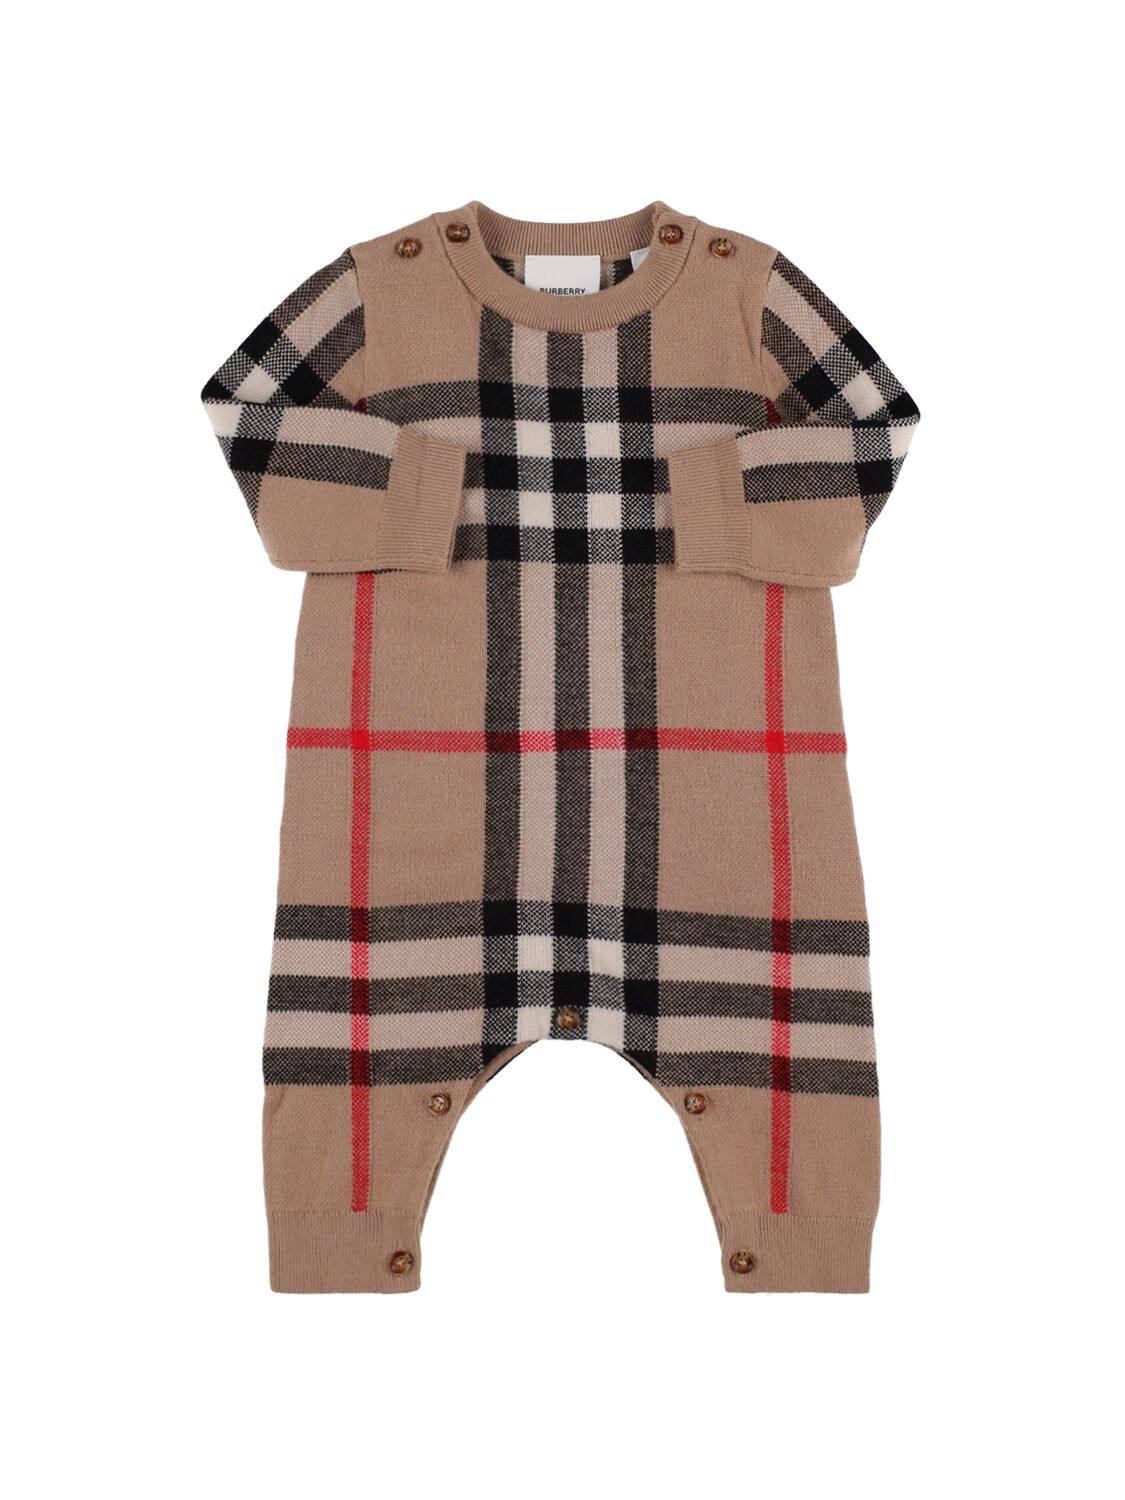 Image of Check Print Wool & Cashmere Romper